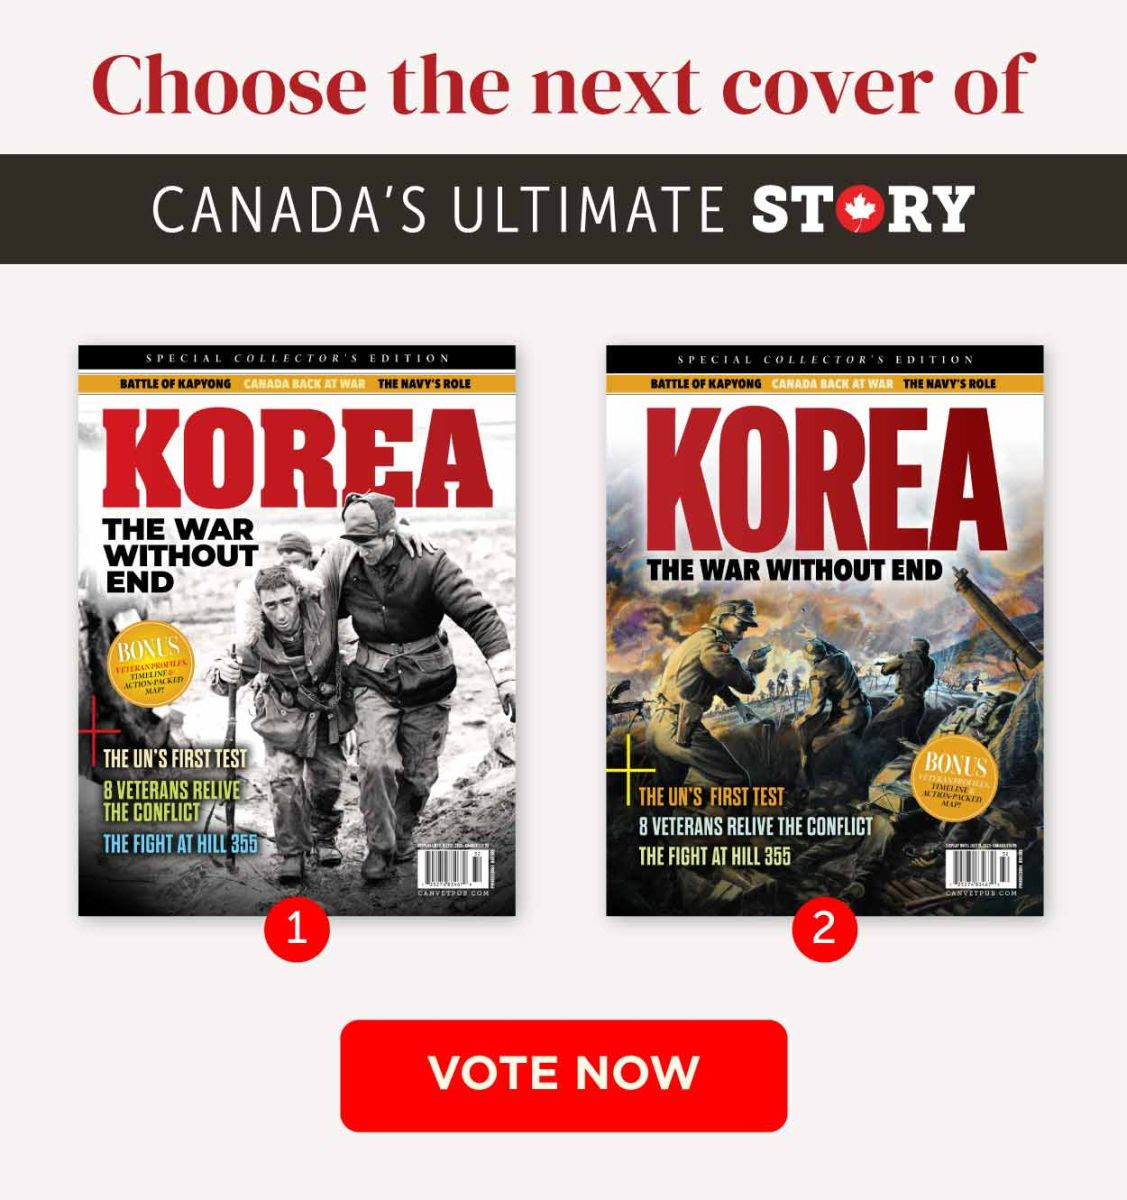 Choose the next cover of Canada's Ultimate Story